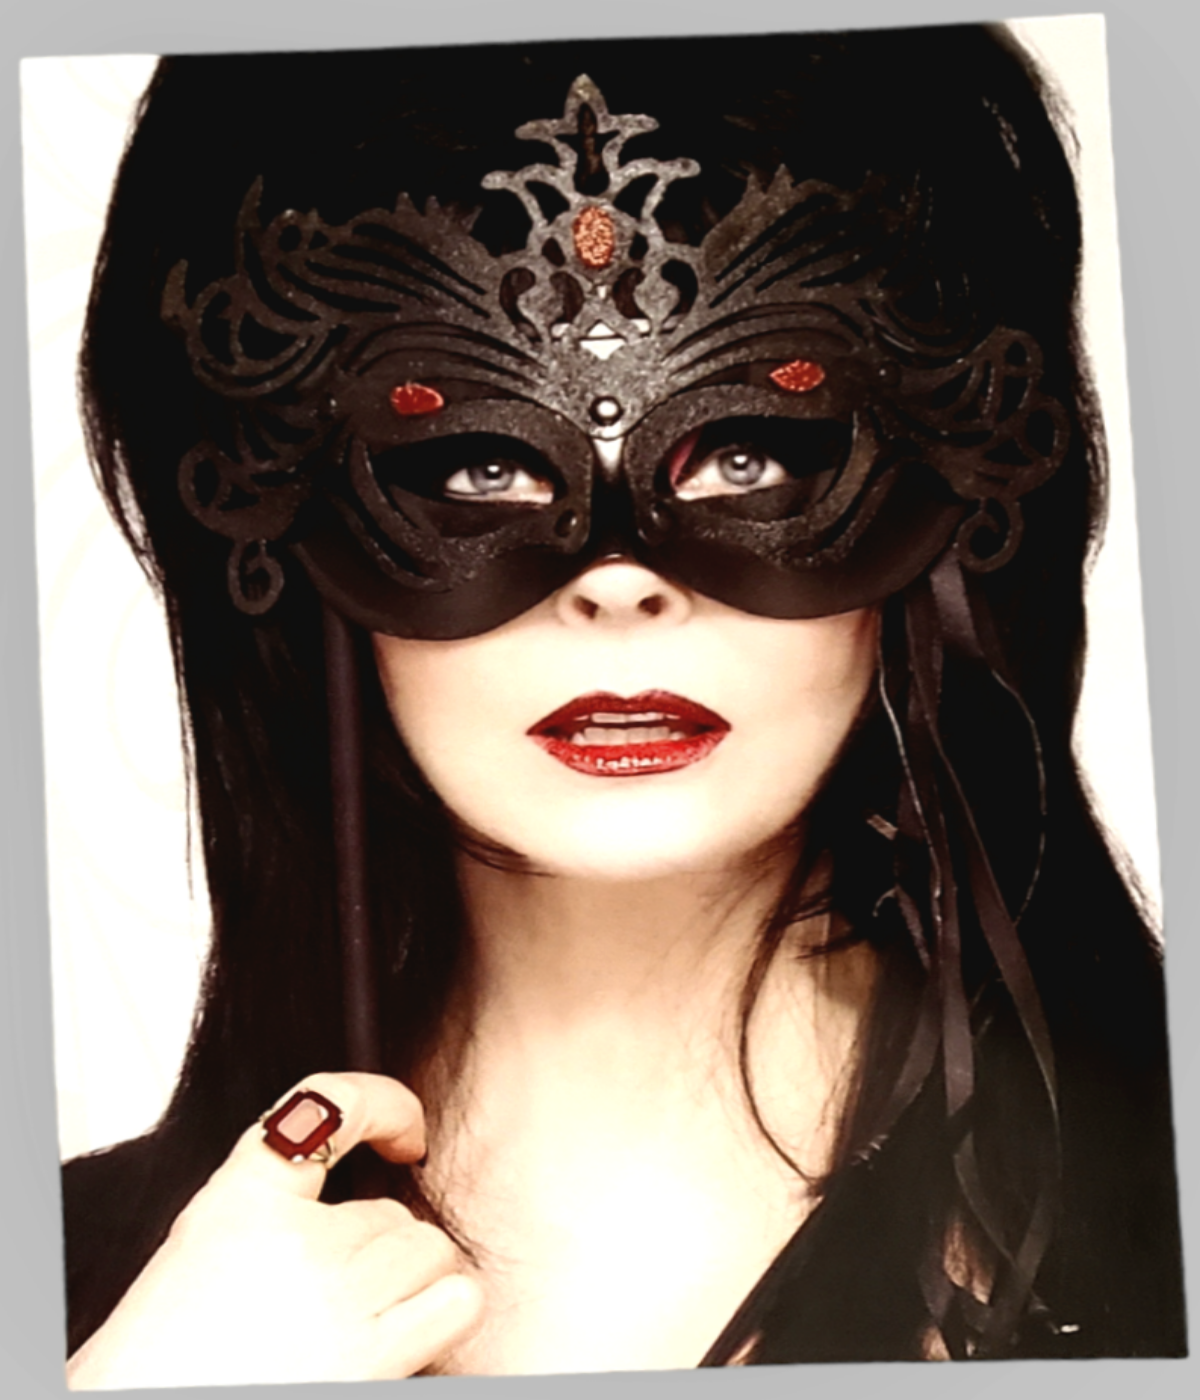 Authentic Elvira Mistress Of The Dark Party Mask Print For Sale in AREA51GALLERY New Orleans 